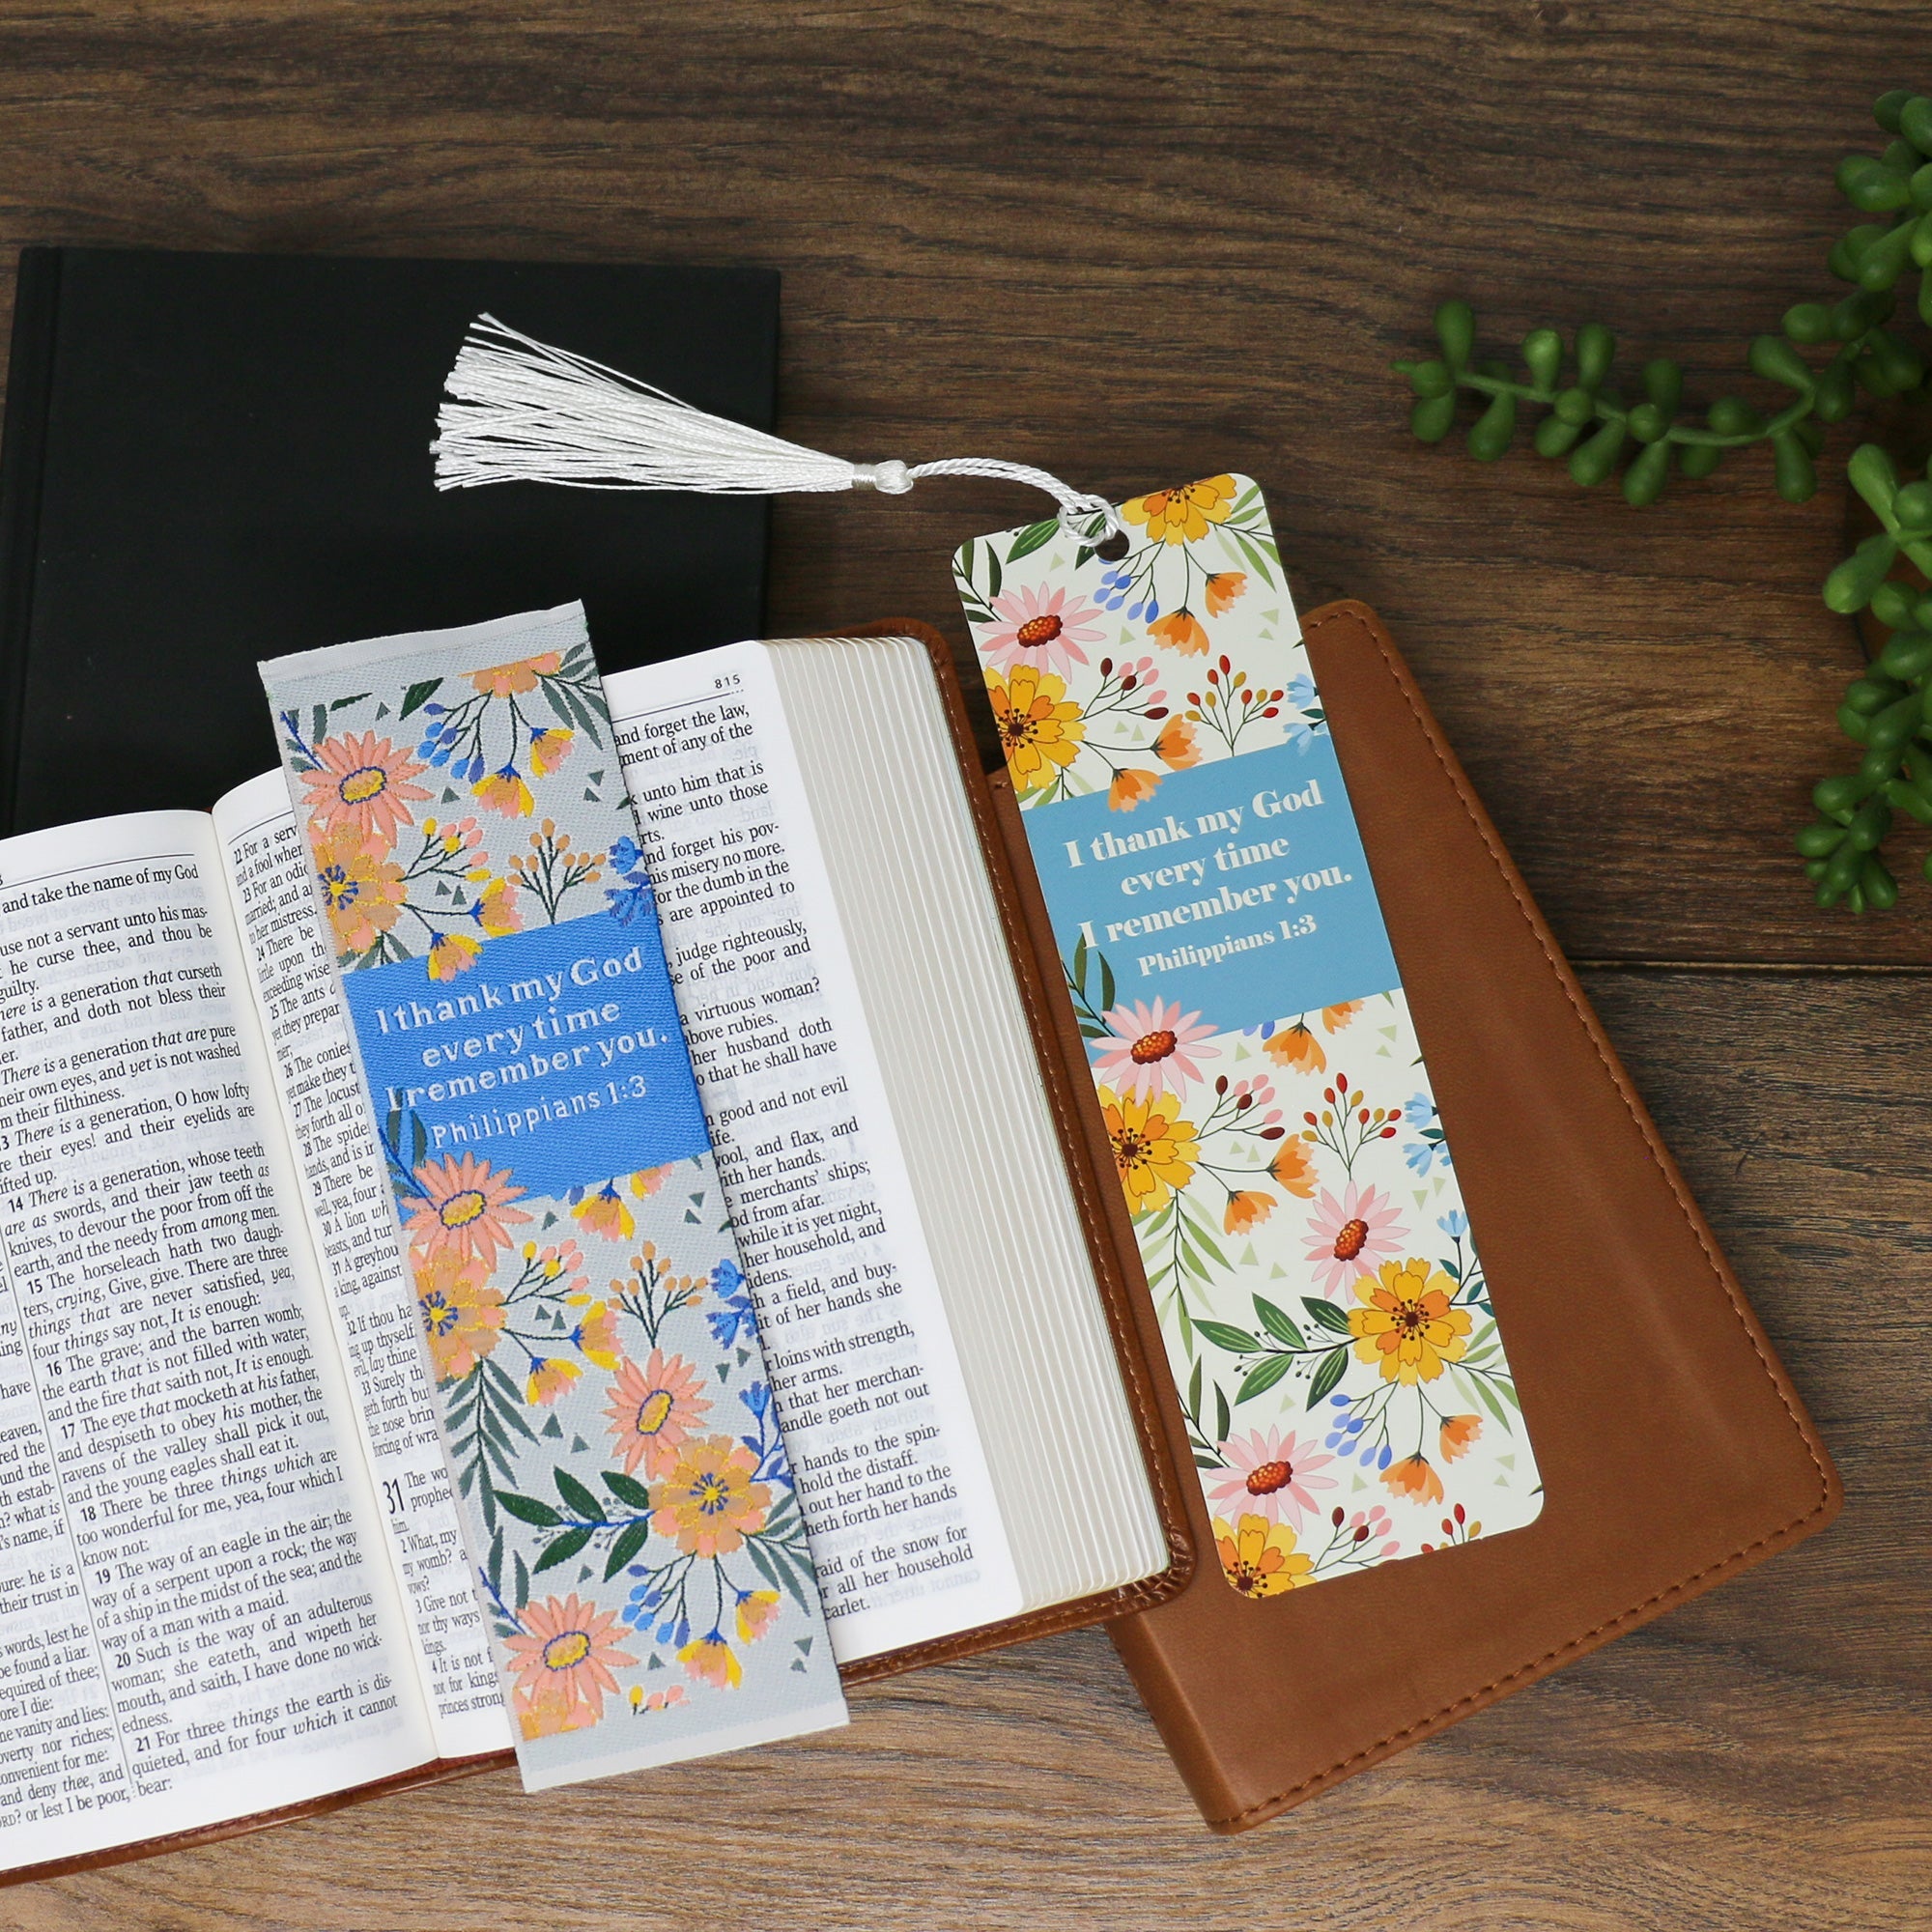 I thank my God every time I remember you - Philippians 1:3 Woven and Tasseled Bookmark Set